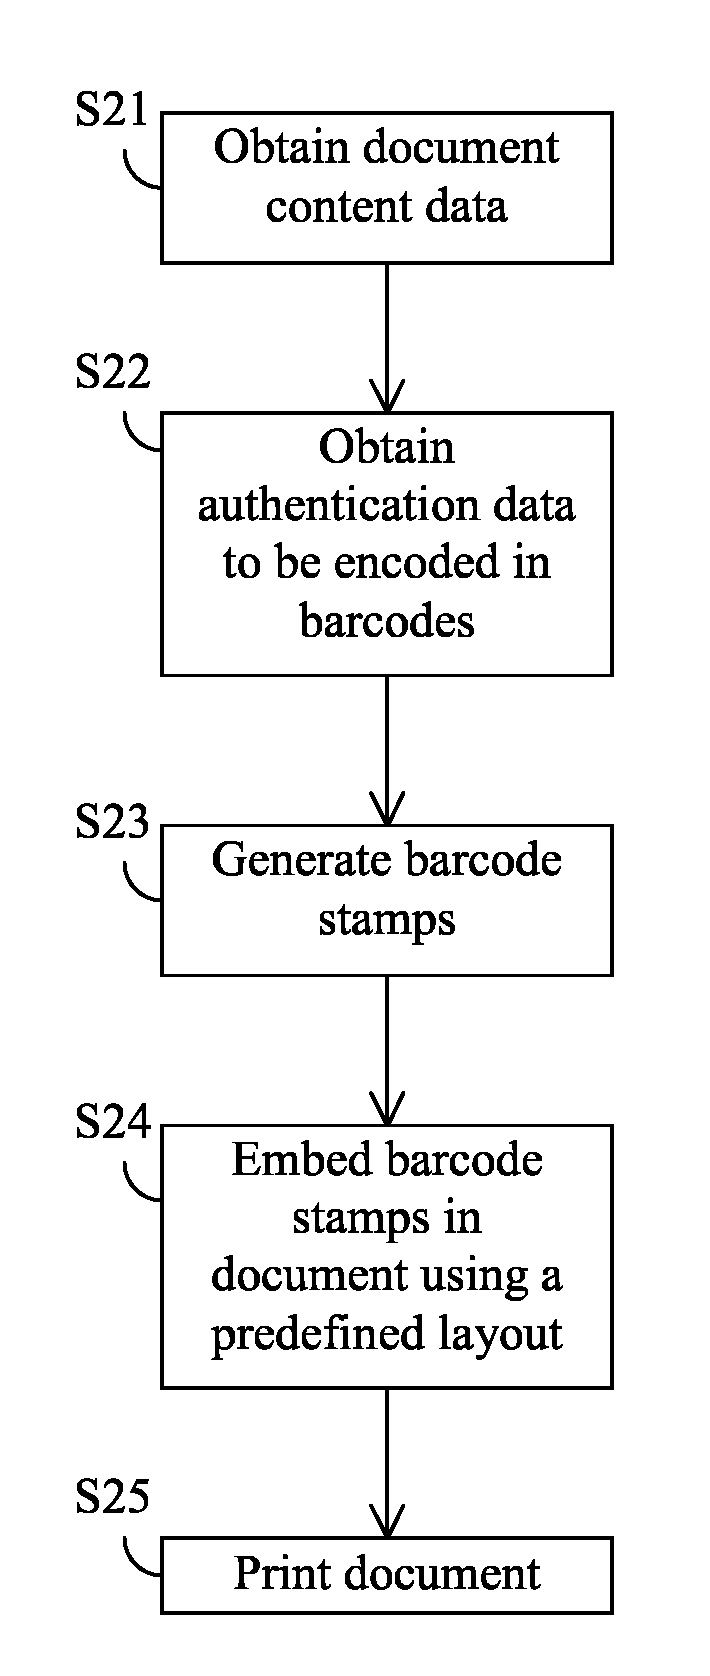 Creation and placement of two-dimensional barcode stamps on printed documents for storing authentication information